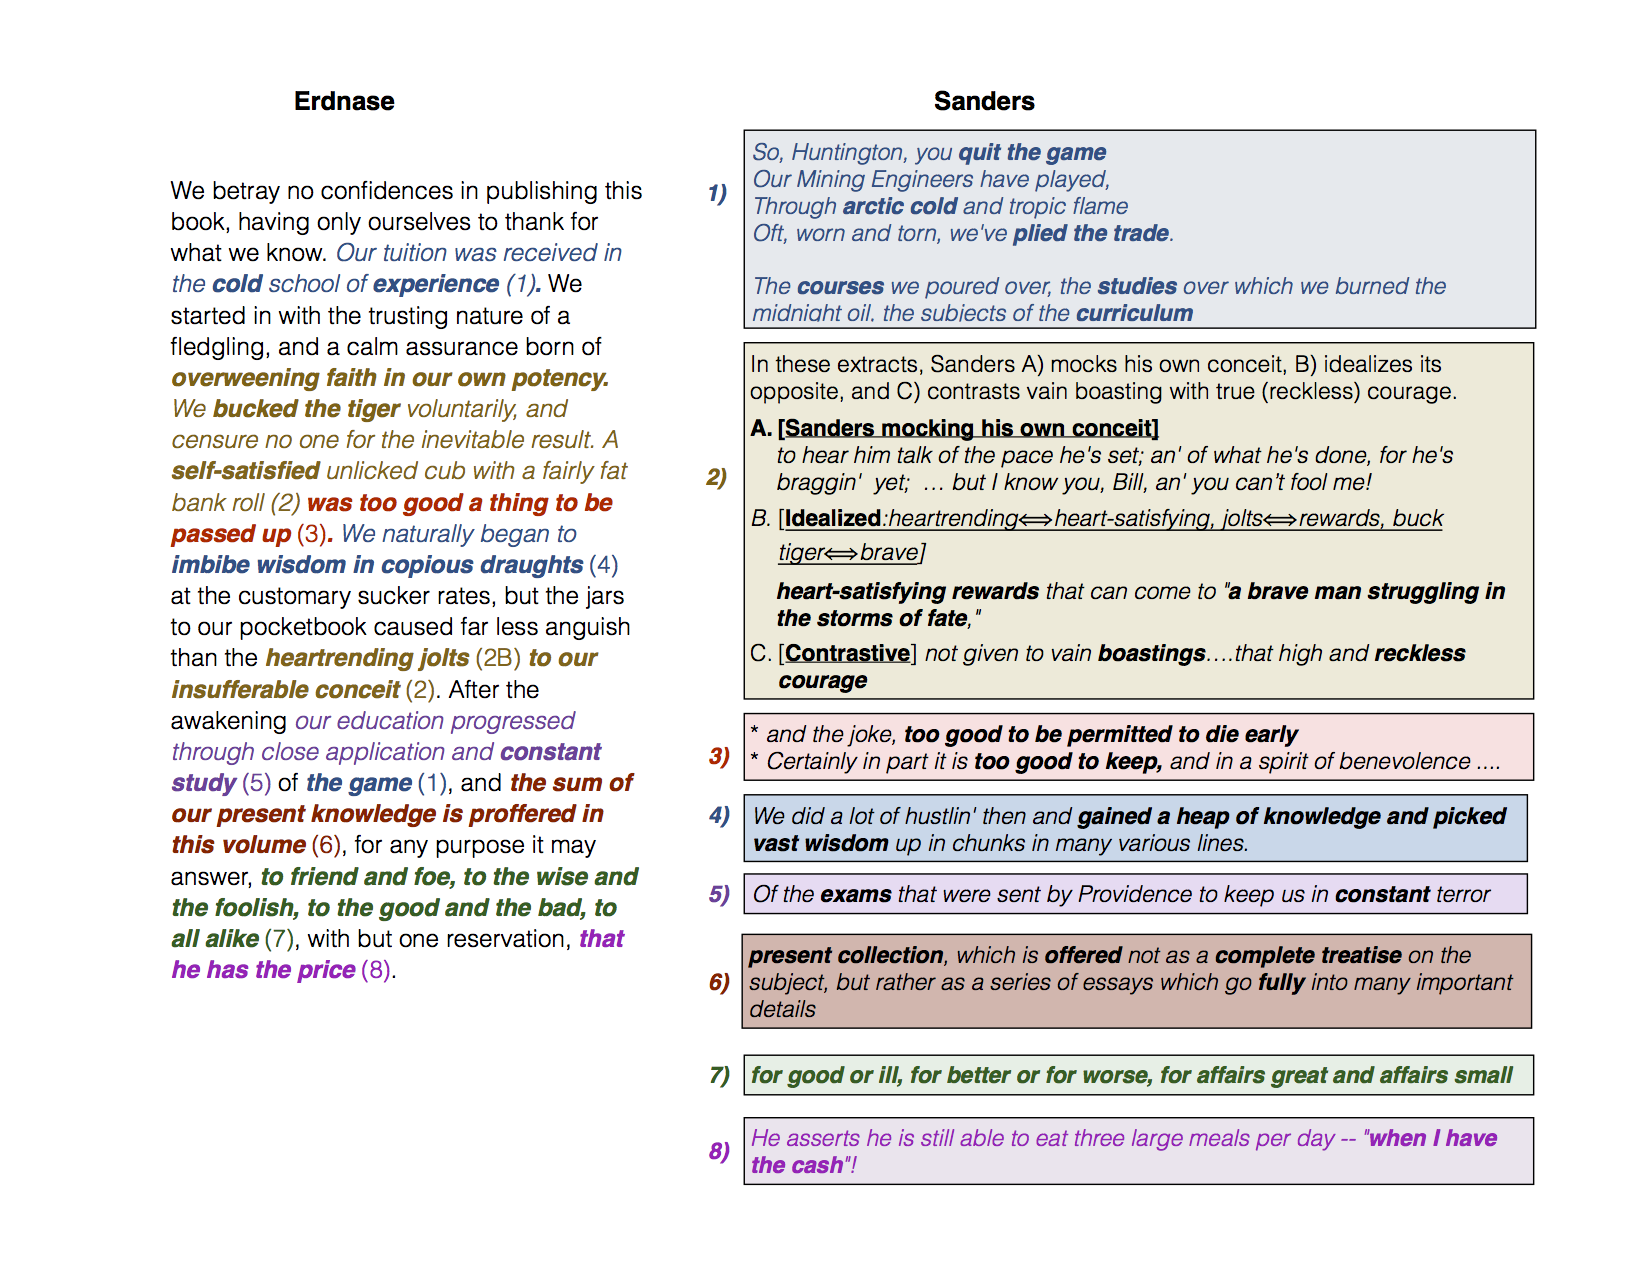 the annotated erdnase